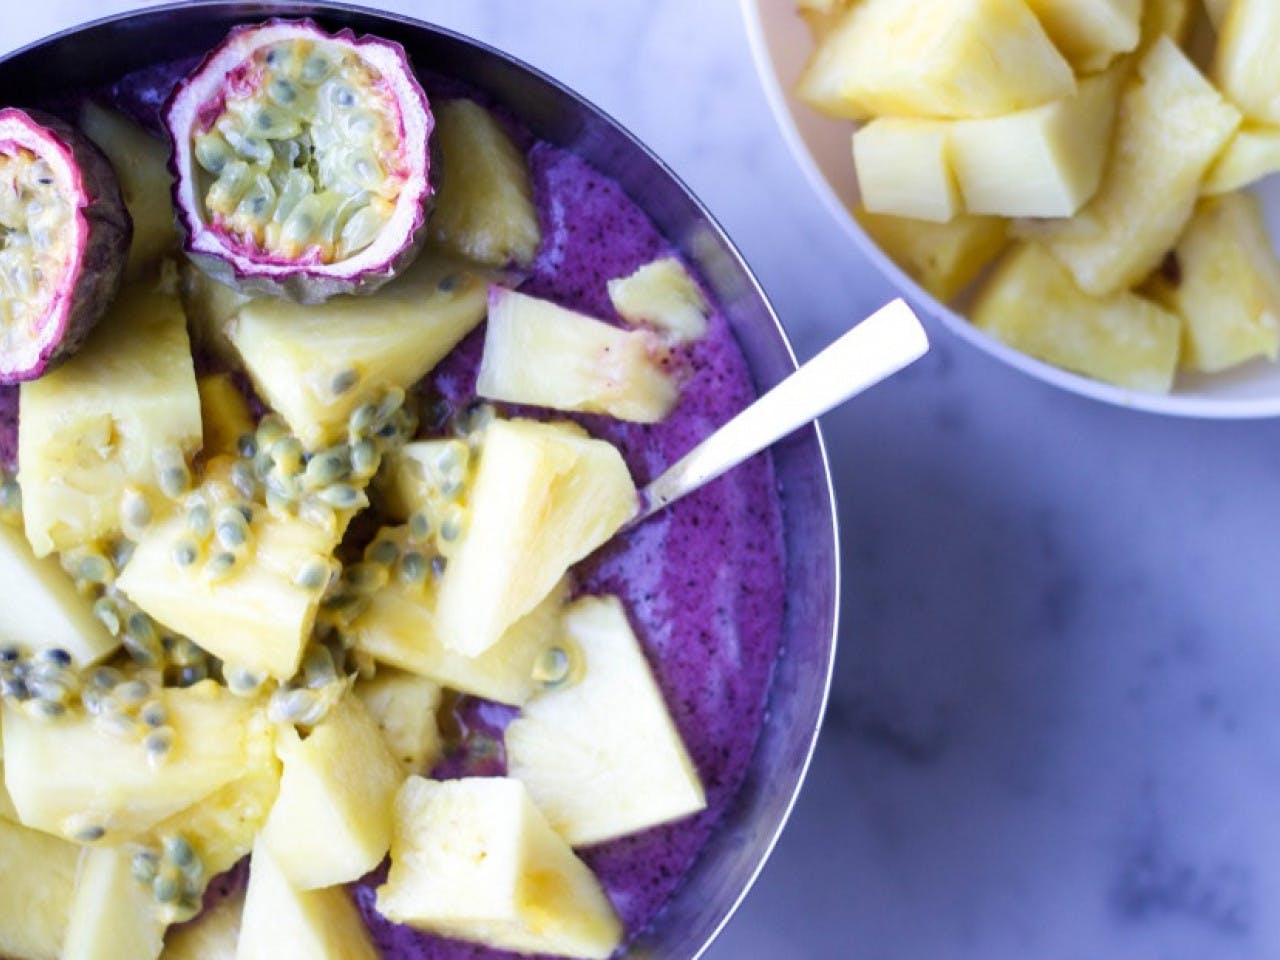 Acai bowl with pineapple and passion fruit